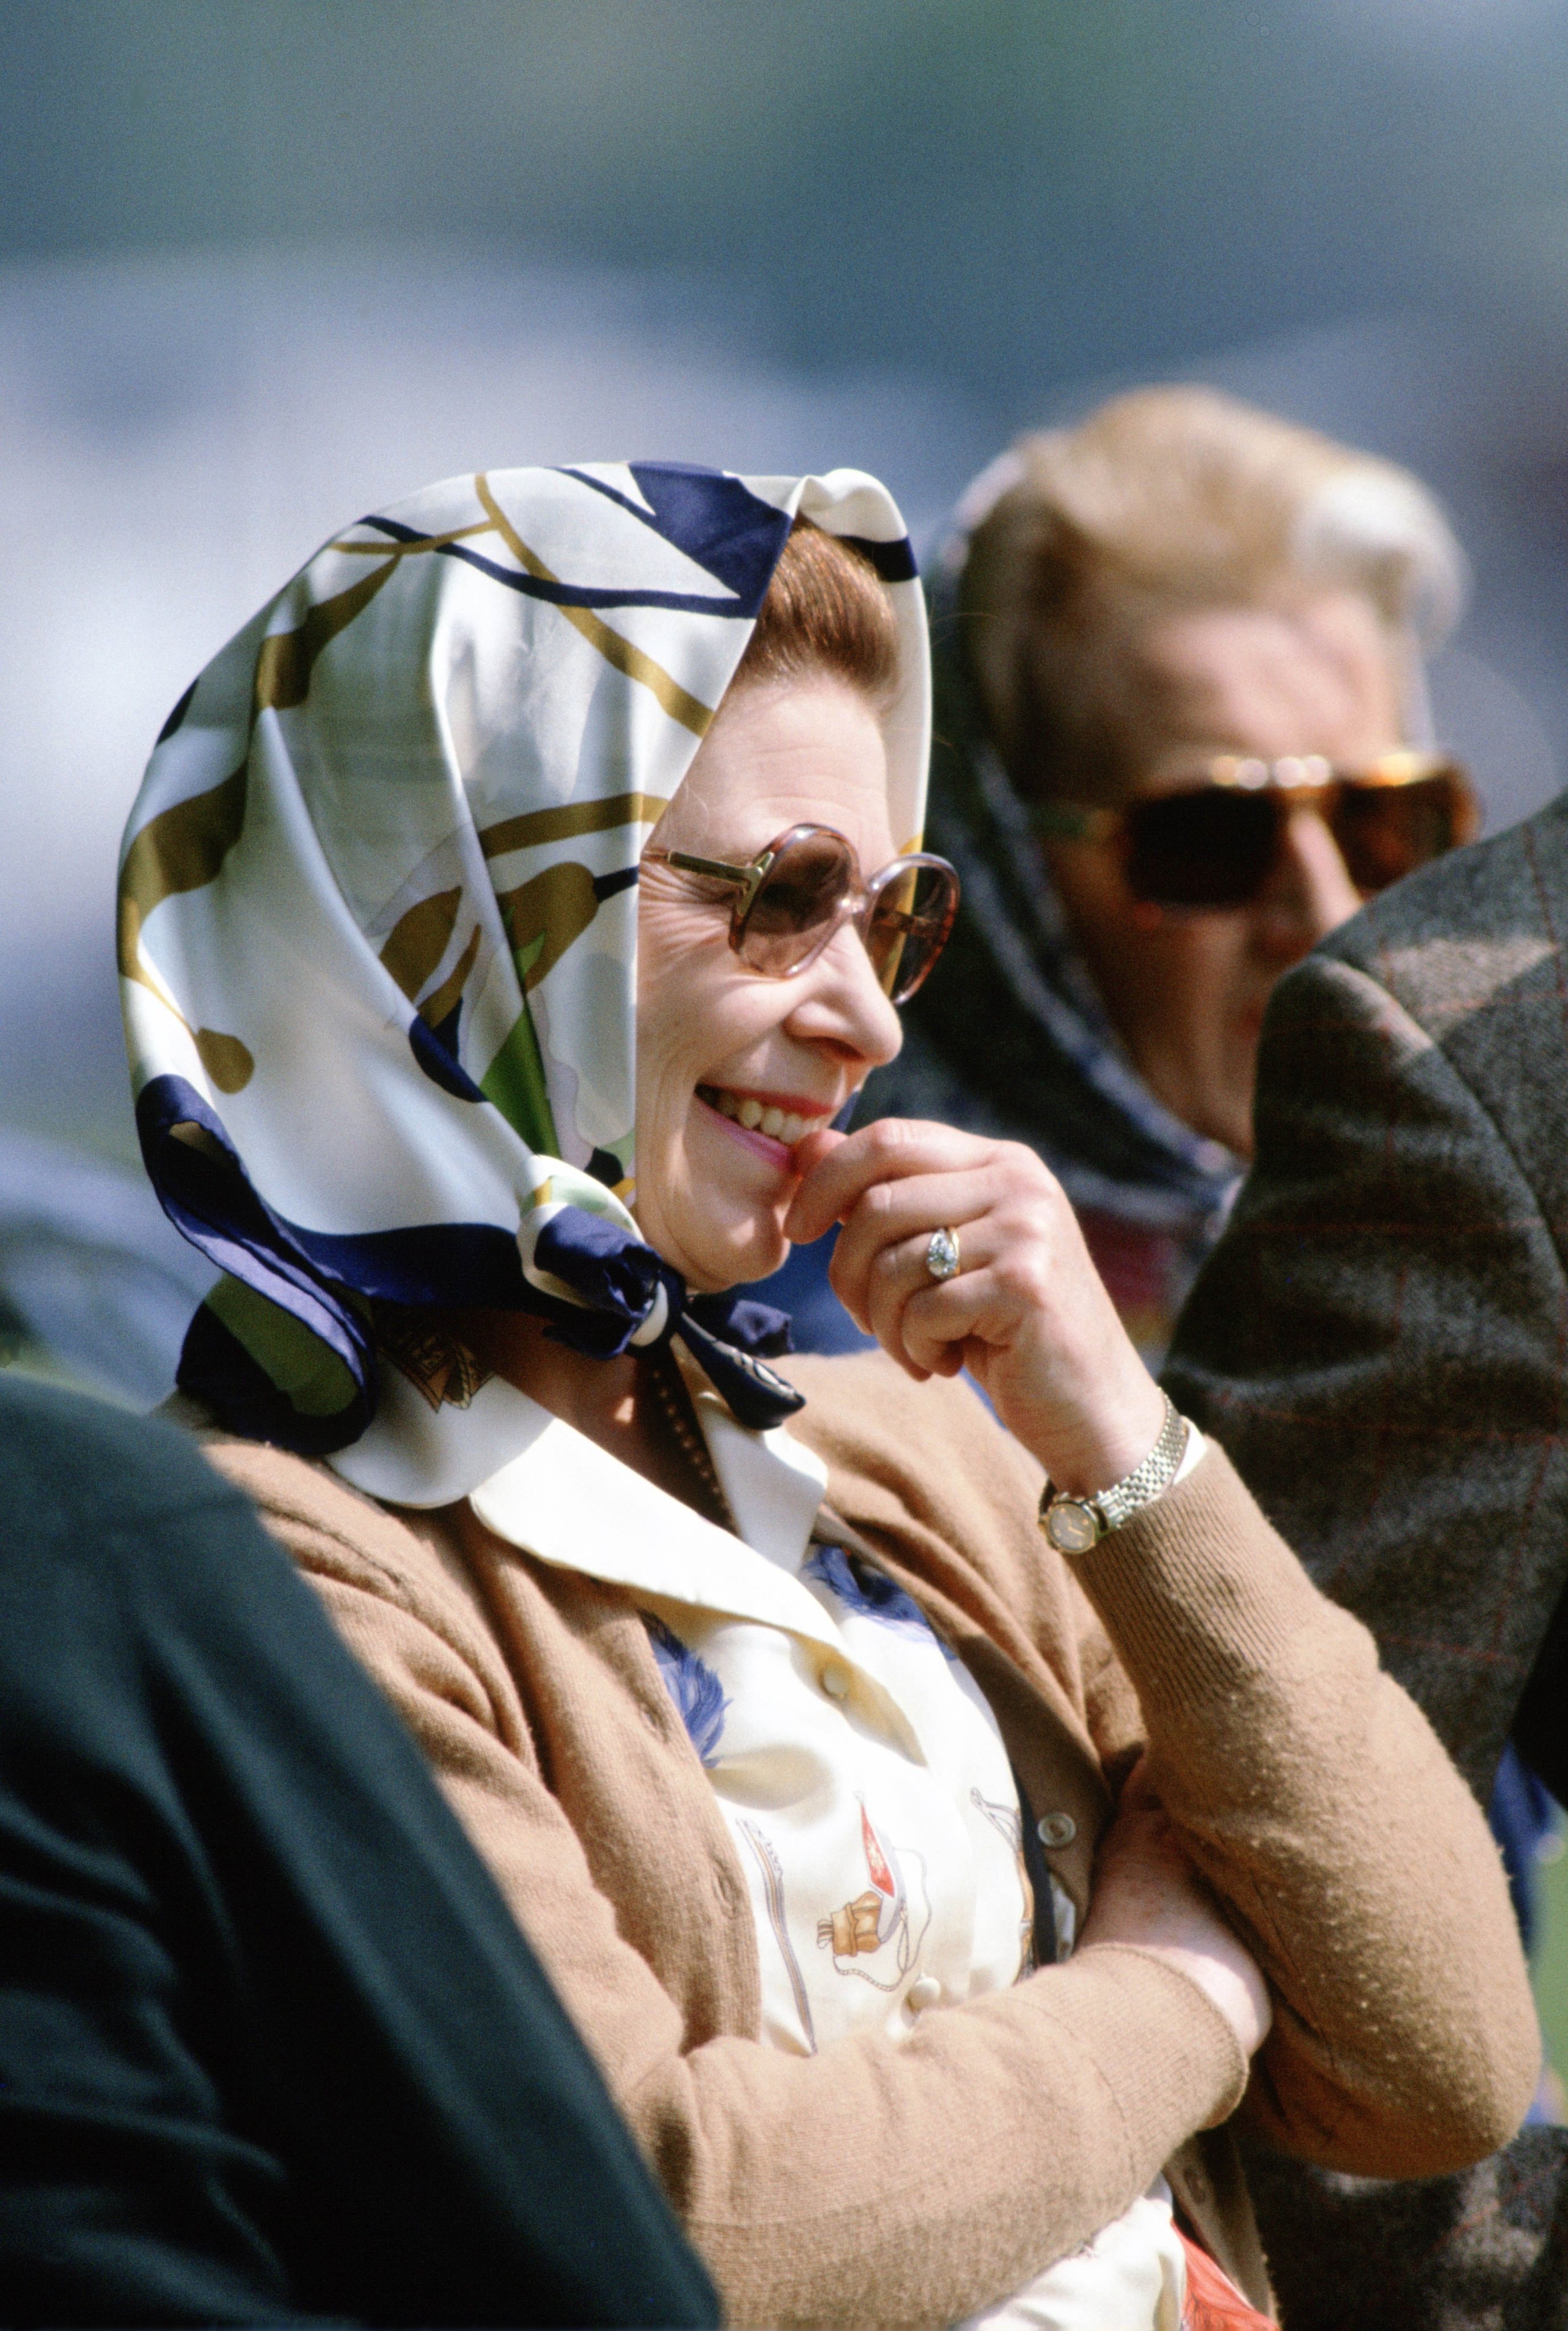 Queen Elizabeth II at the Royal Windsor Horse Show watching